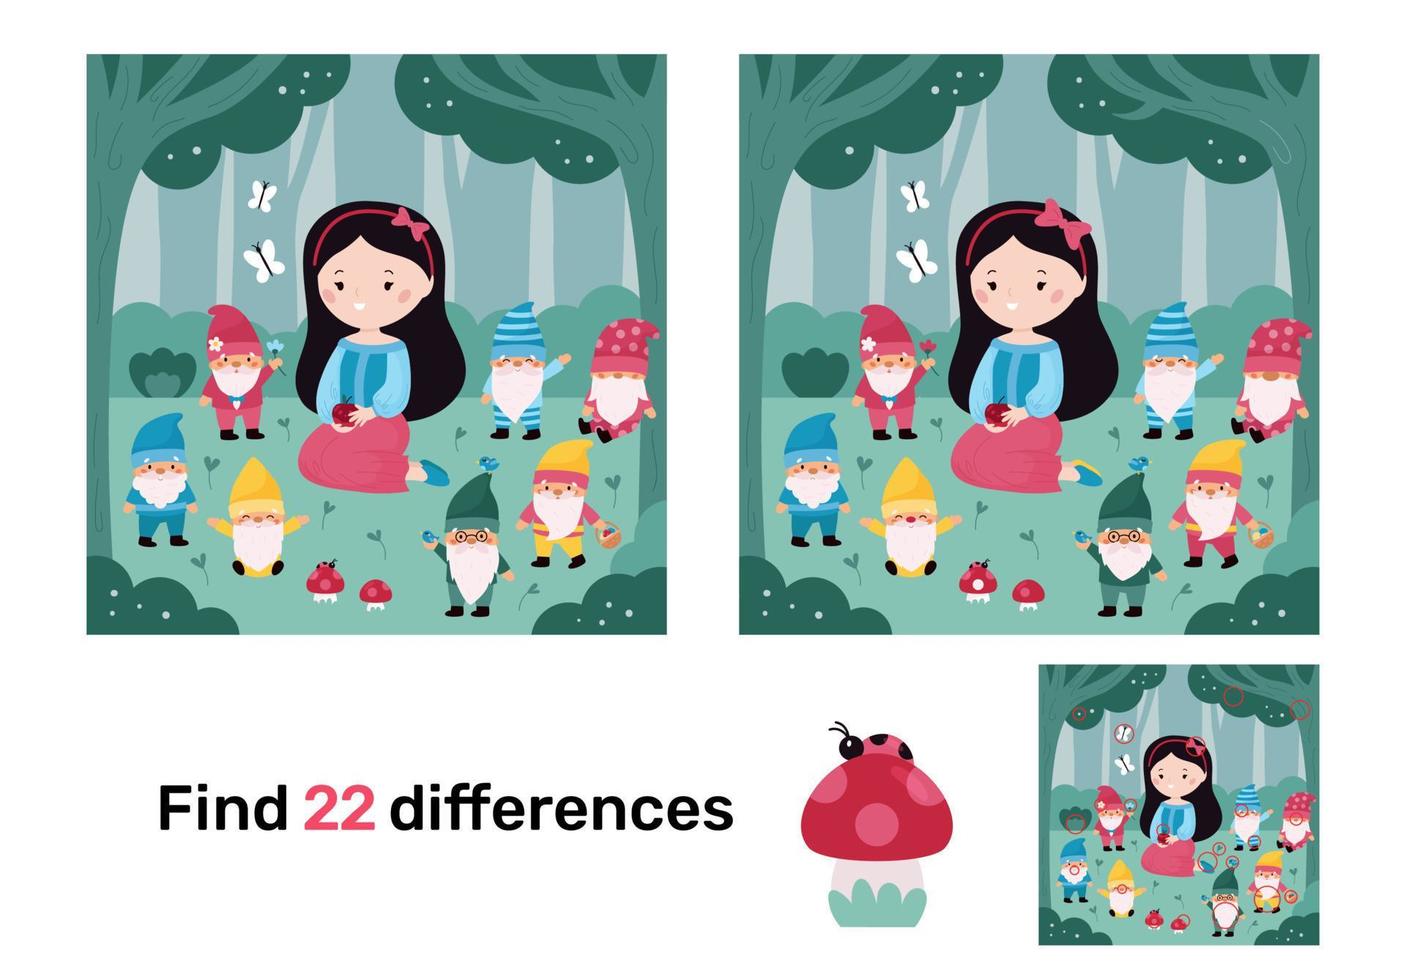 Educational game for children. Find differences. Snow White and seven dwarfs fairy tale. Kawaii cartoon characters. Puzzle for kids. Vector illustration.